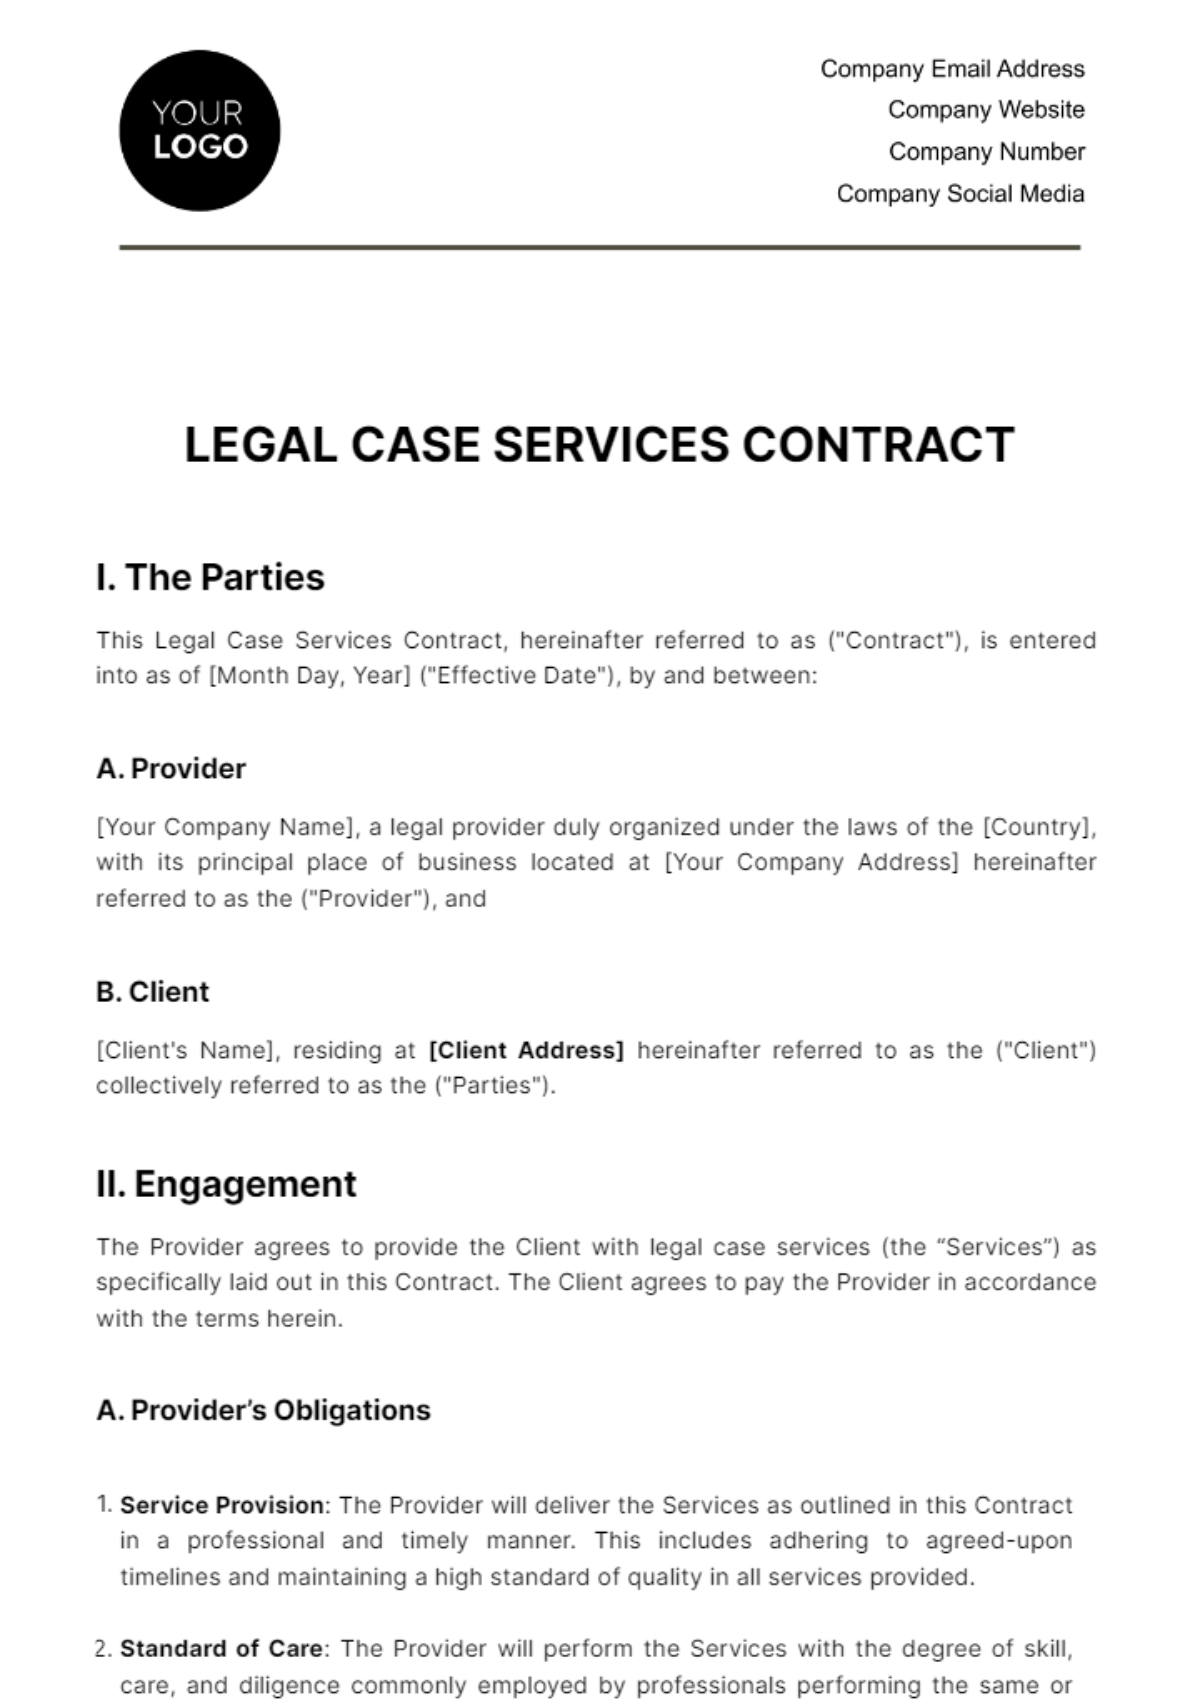 Legal Case Services Contract Template